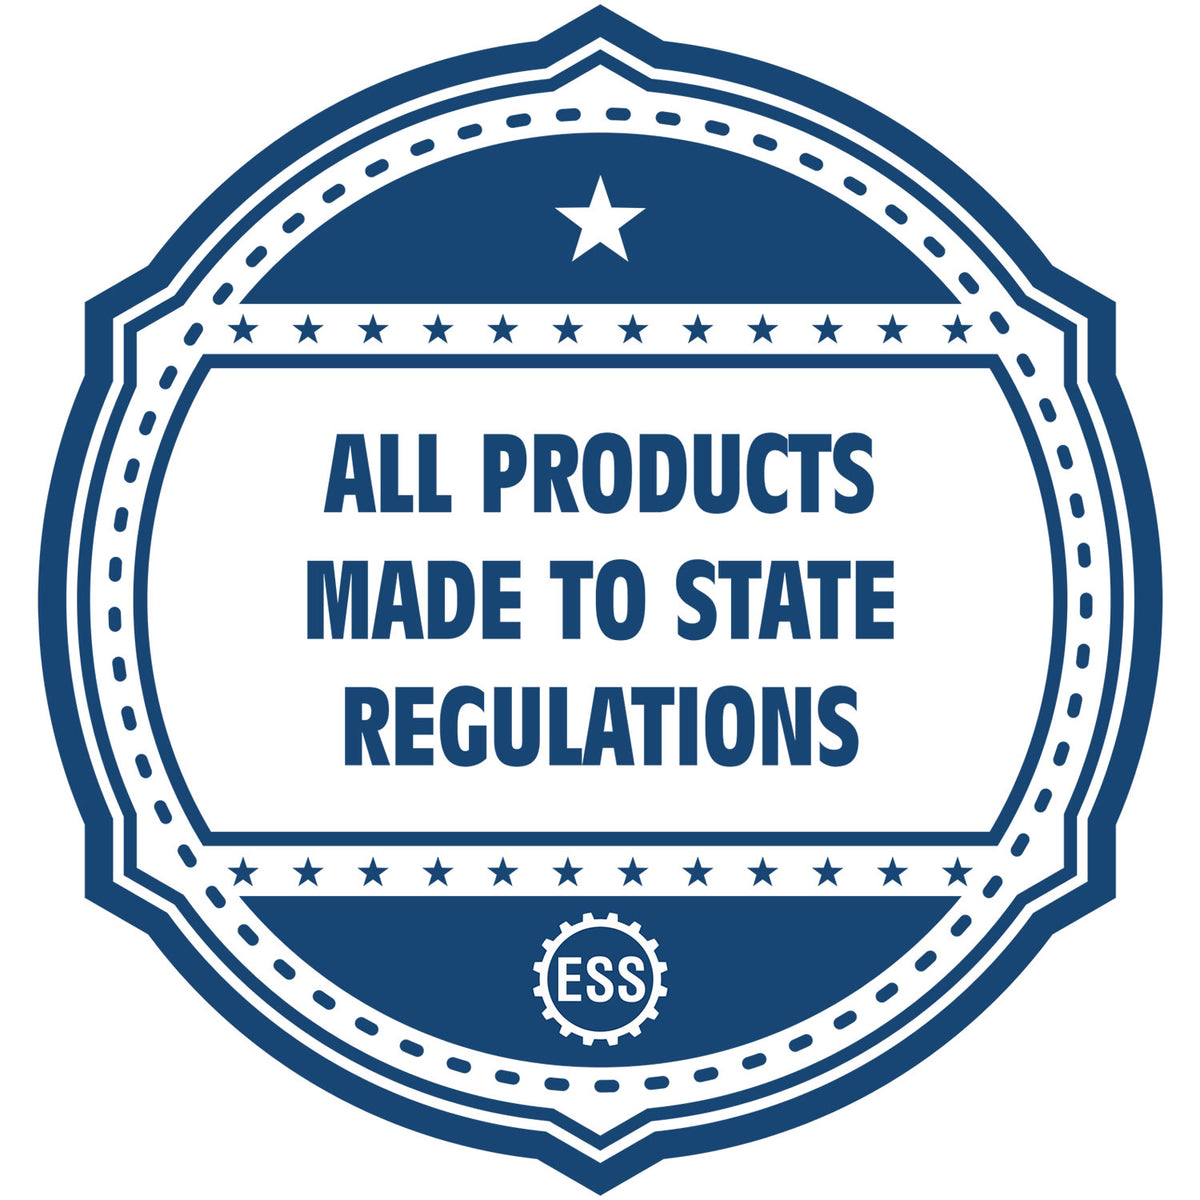 An icon or badge element for the Slim Pre-Inked Arizona Landscape Architect Seal Stamp showing that this product is made in compliance with state regulations.